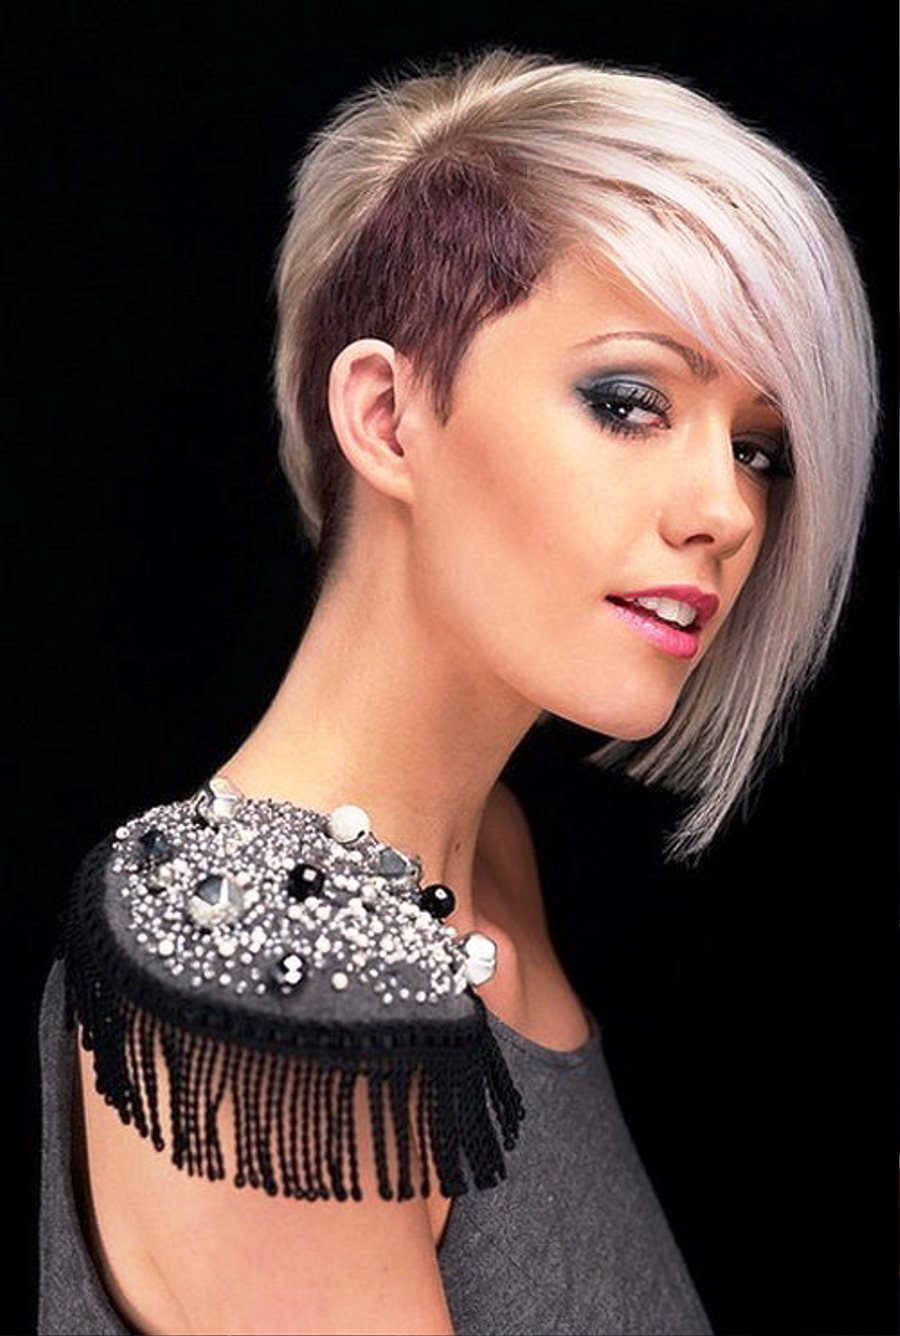 Cool Short Hairstyles For Women 2013